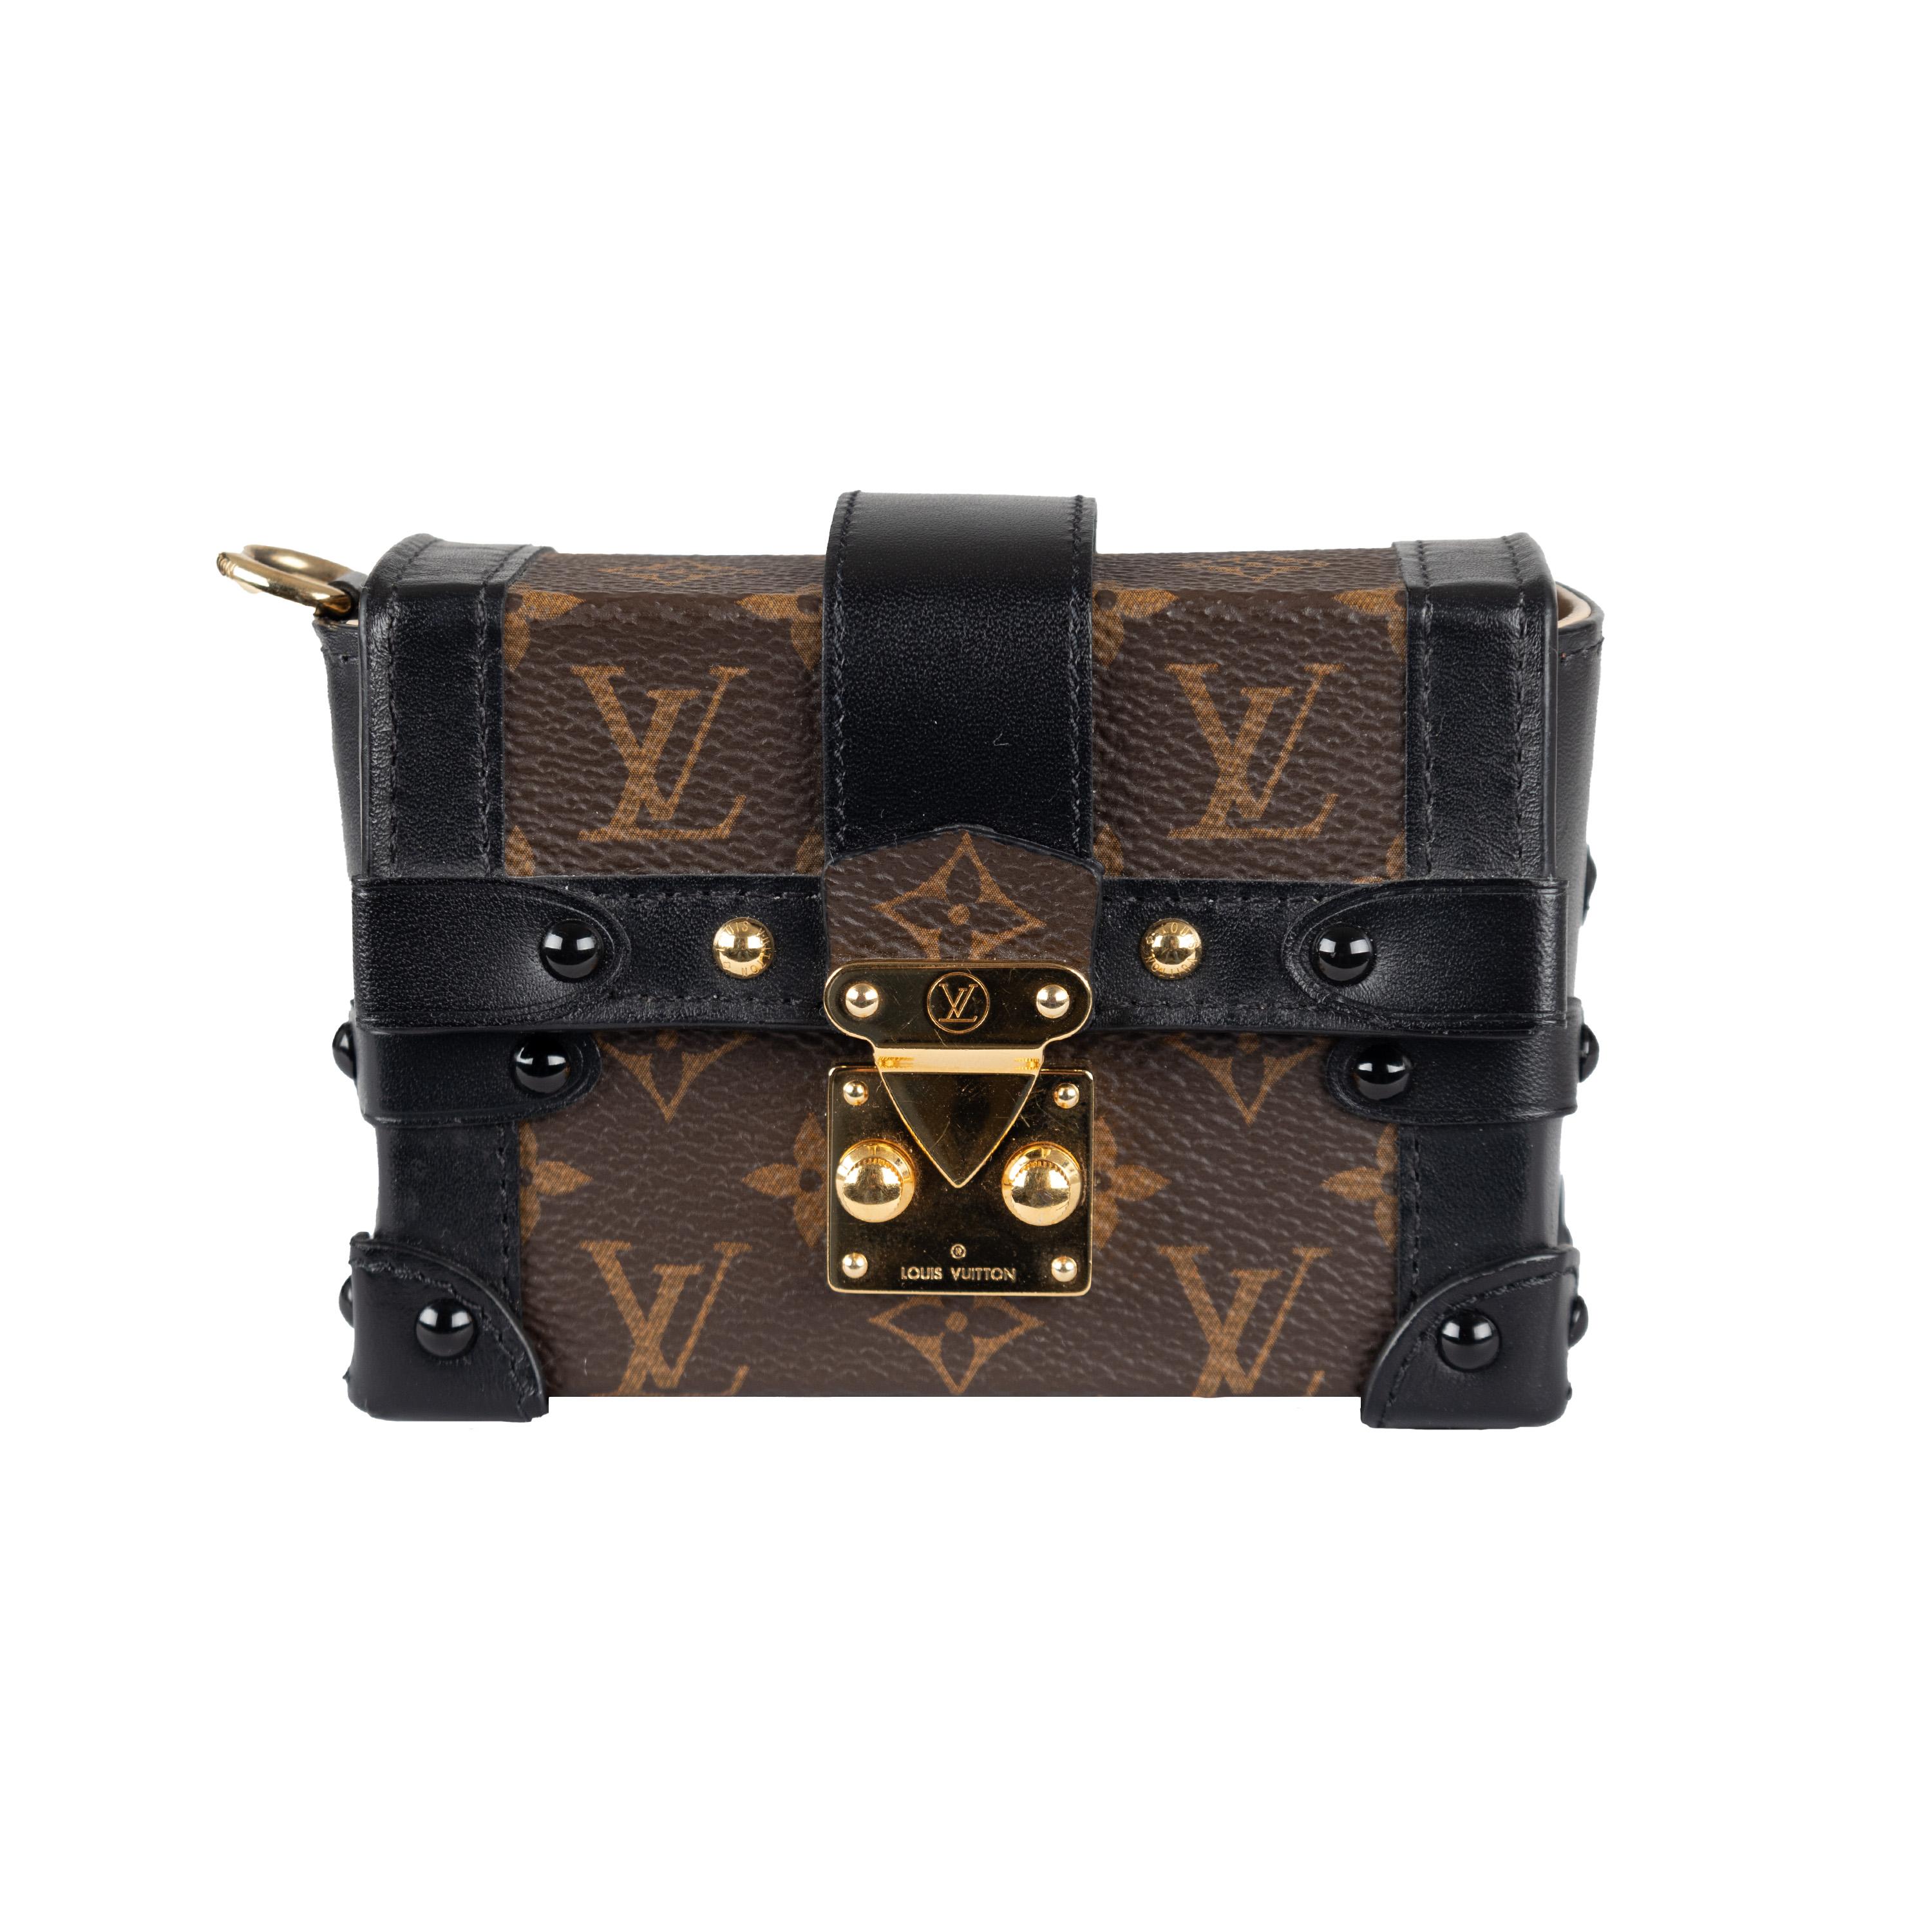 This Louis Vuitton Essential Trunk Mini Bag is crafted with Monogram Canvas and Trunk detailing on the edges. It features an iconic S-lock crafted in aged gold hardware and a detachable chain strap perfect for multiple uses: such as a mini clutch,